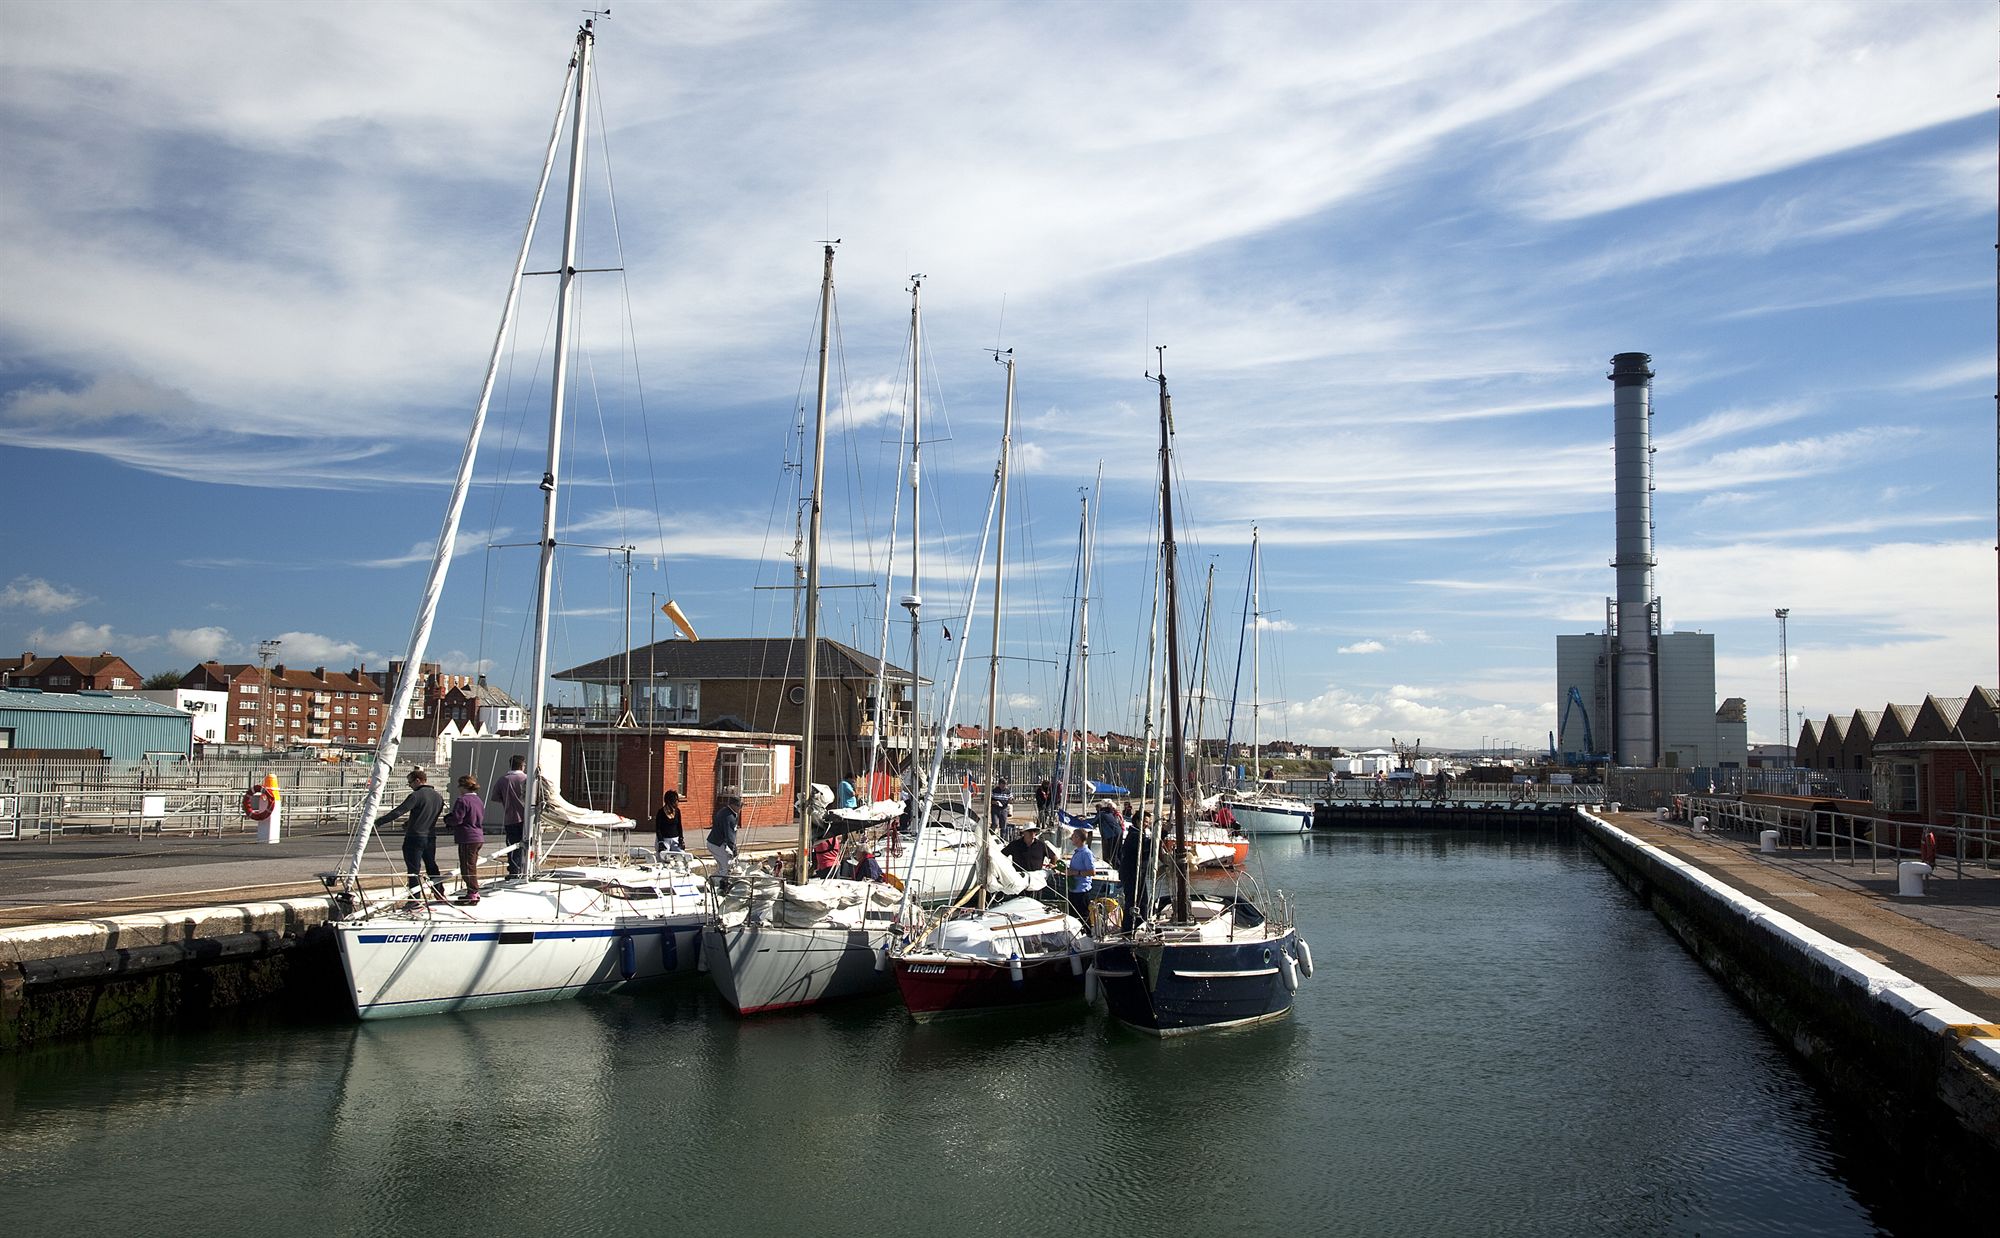 Shoreham Port improves service to leisure users with new marina management system